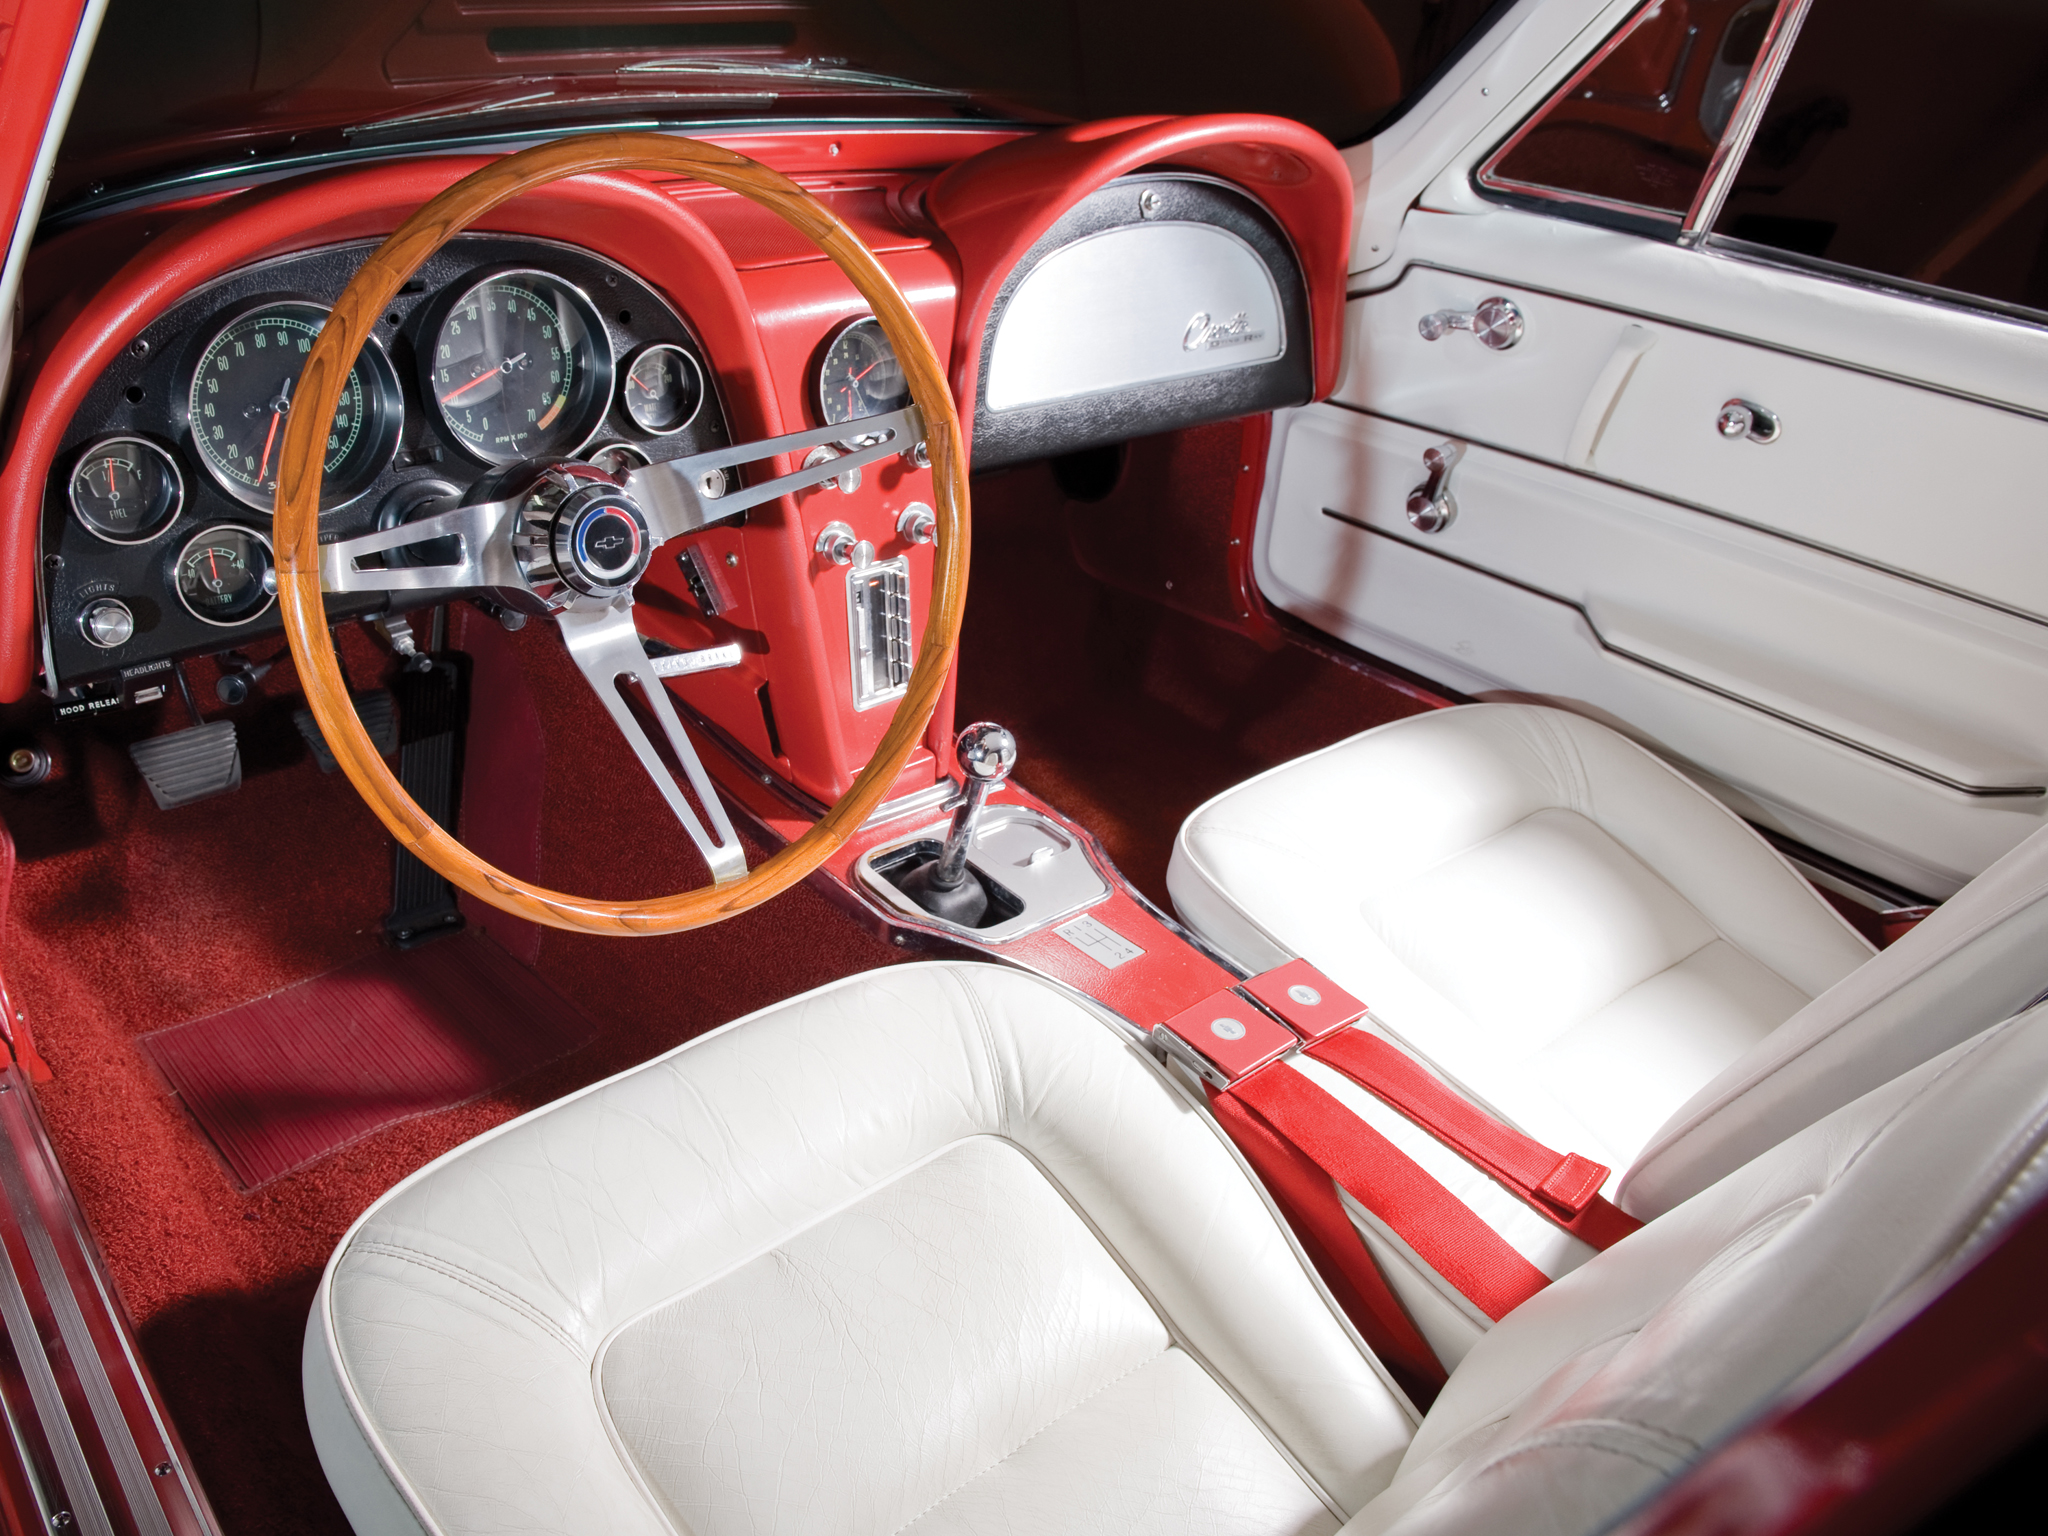 1965, Chevrolet, Corvette, Sting, Ray, L84, 327, Fuel, Injection, C 2, Supercar, Muscle, Classic, Interior Wallpaper